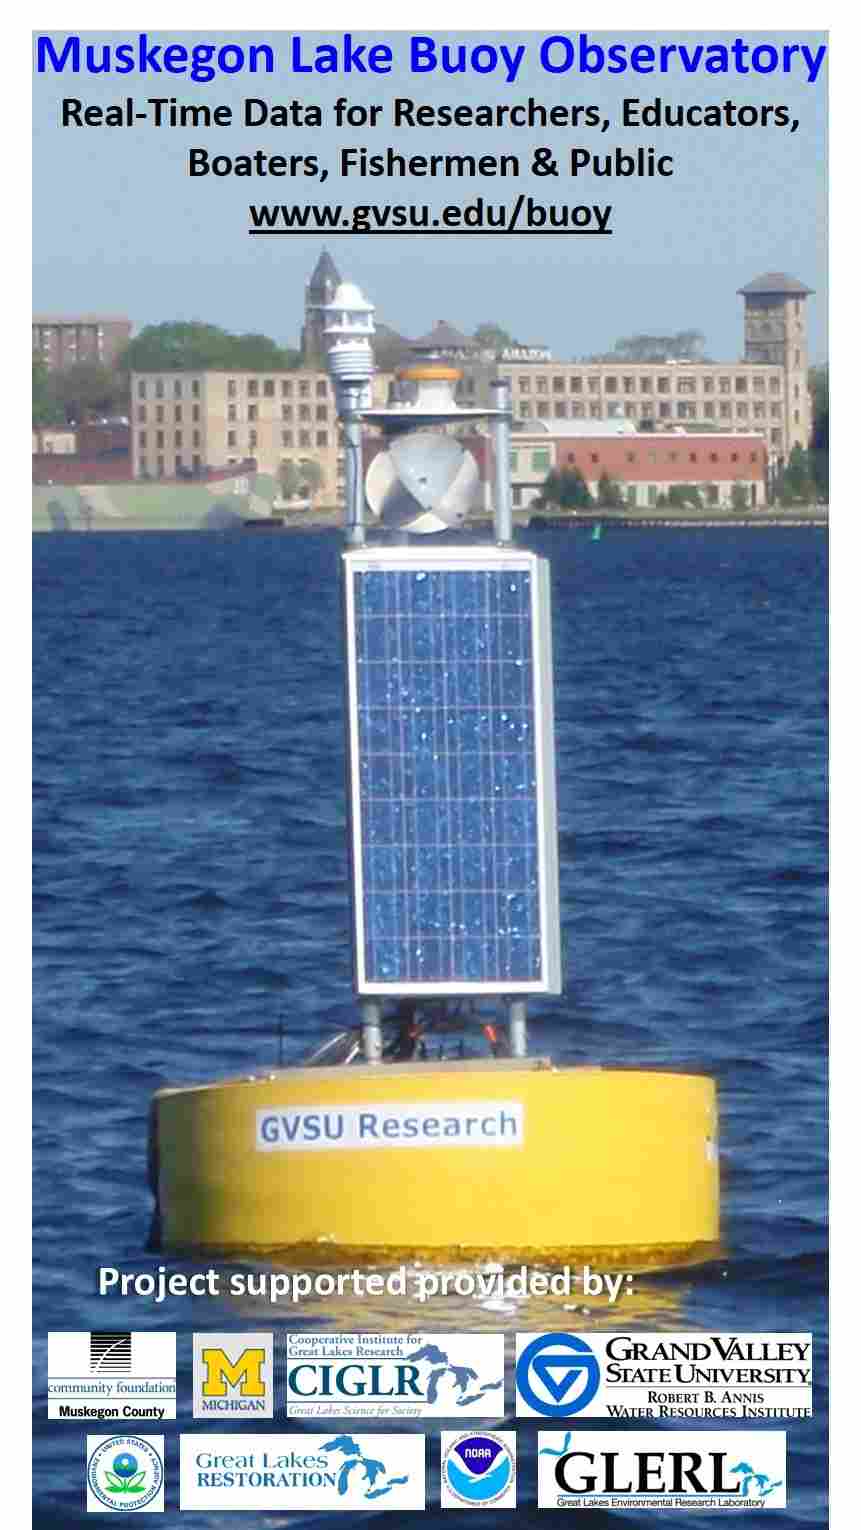 The Muskegon Lake Observatory Buoy with website www.gvsu.edu/buoy and project funders